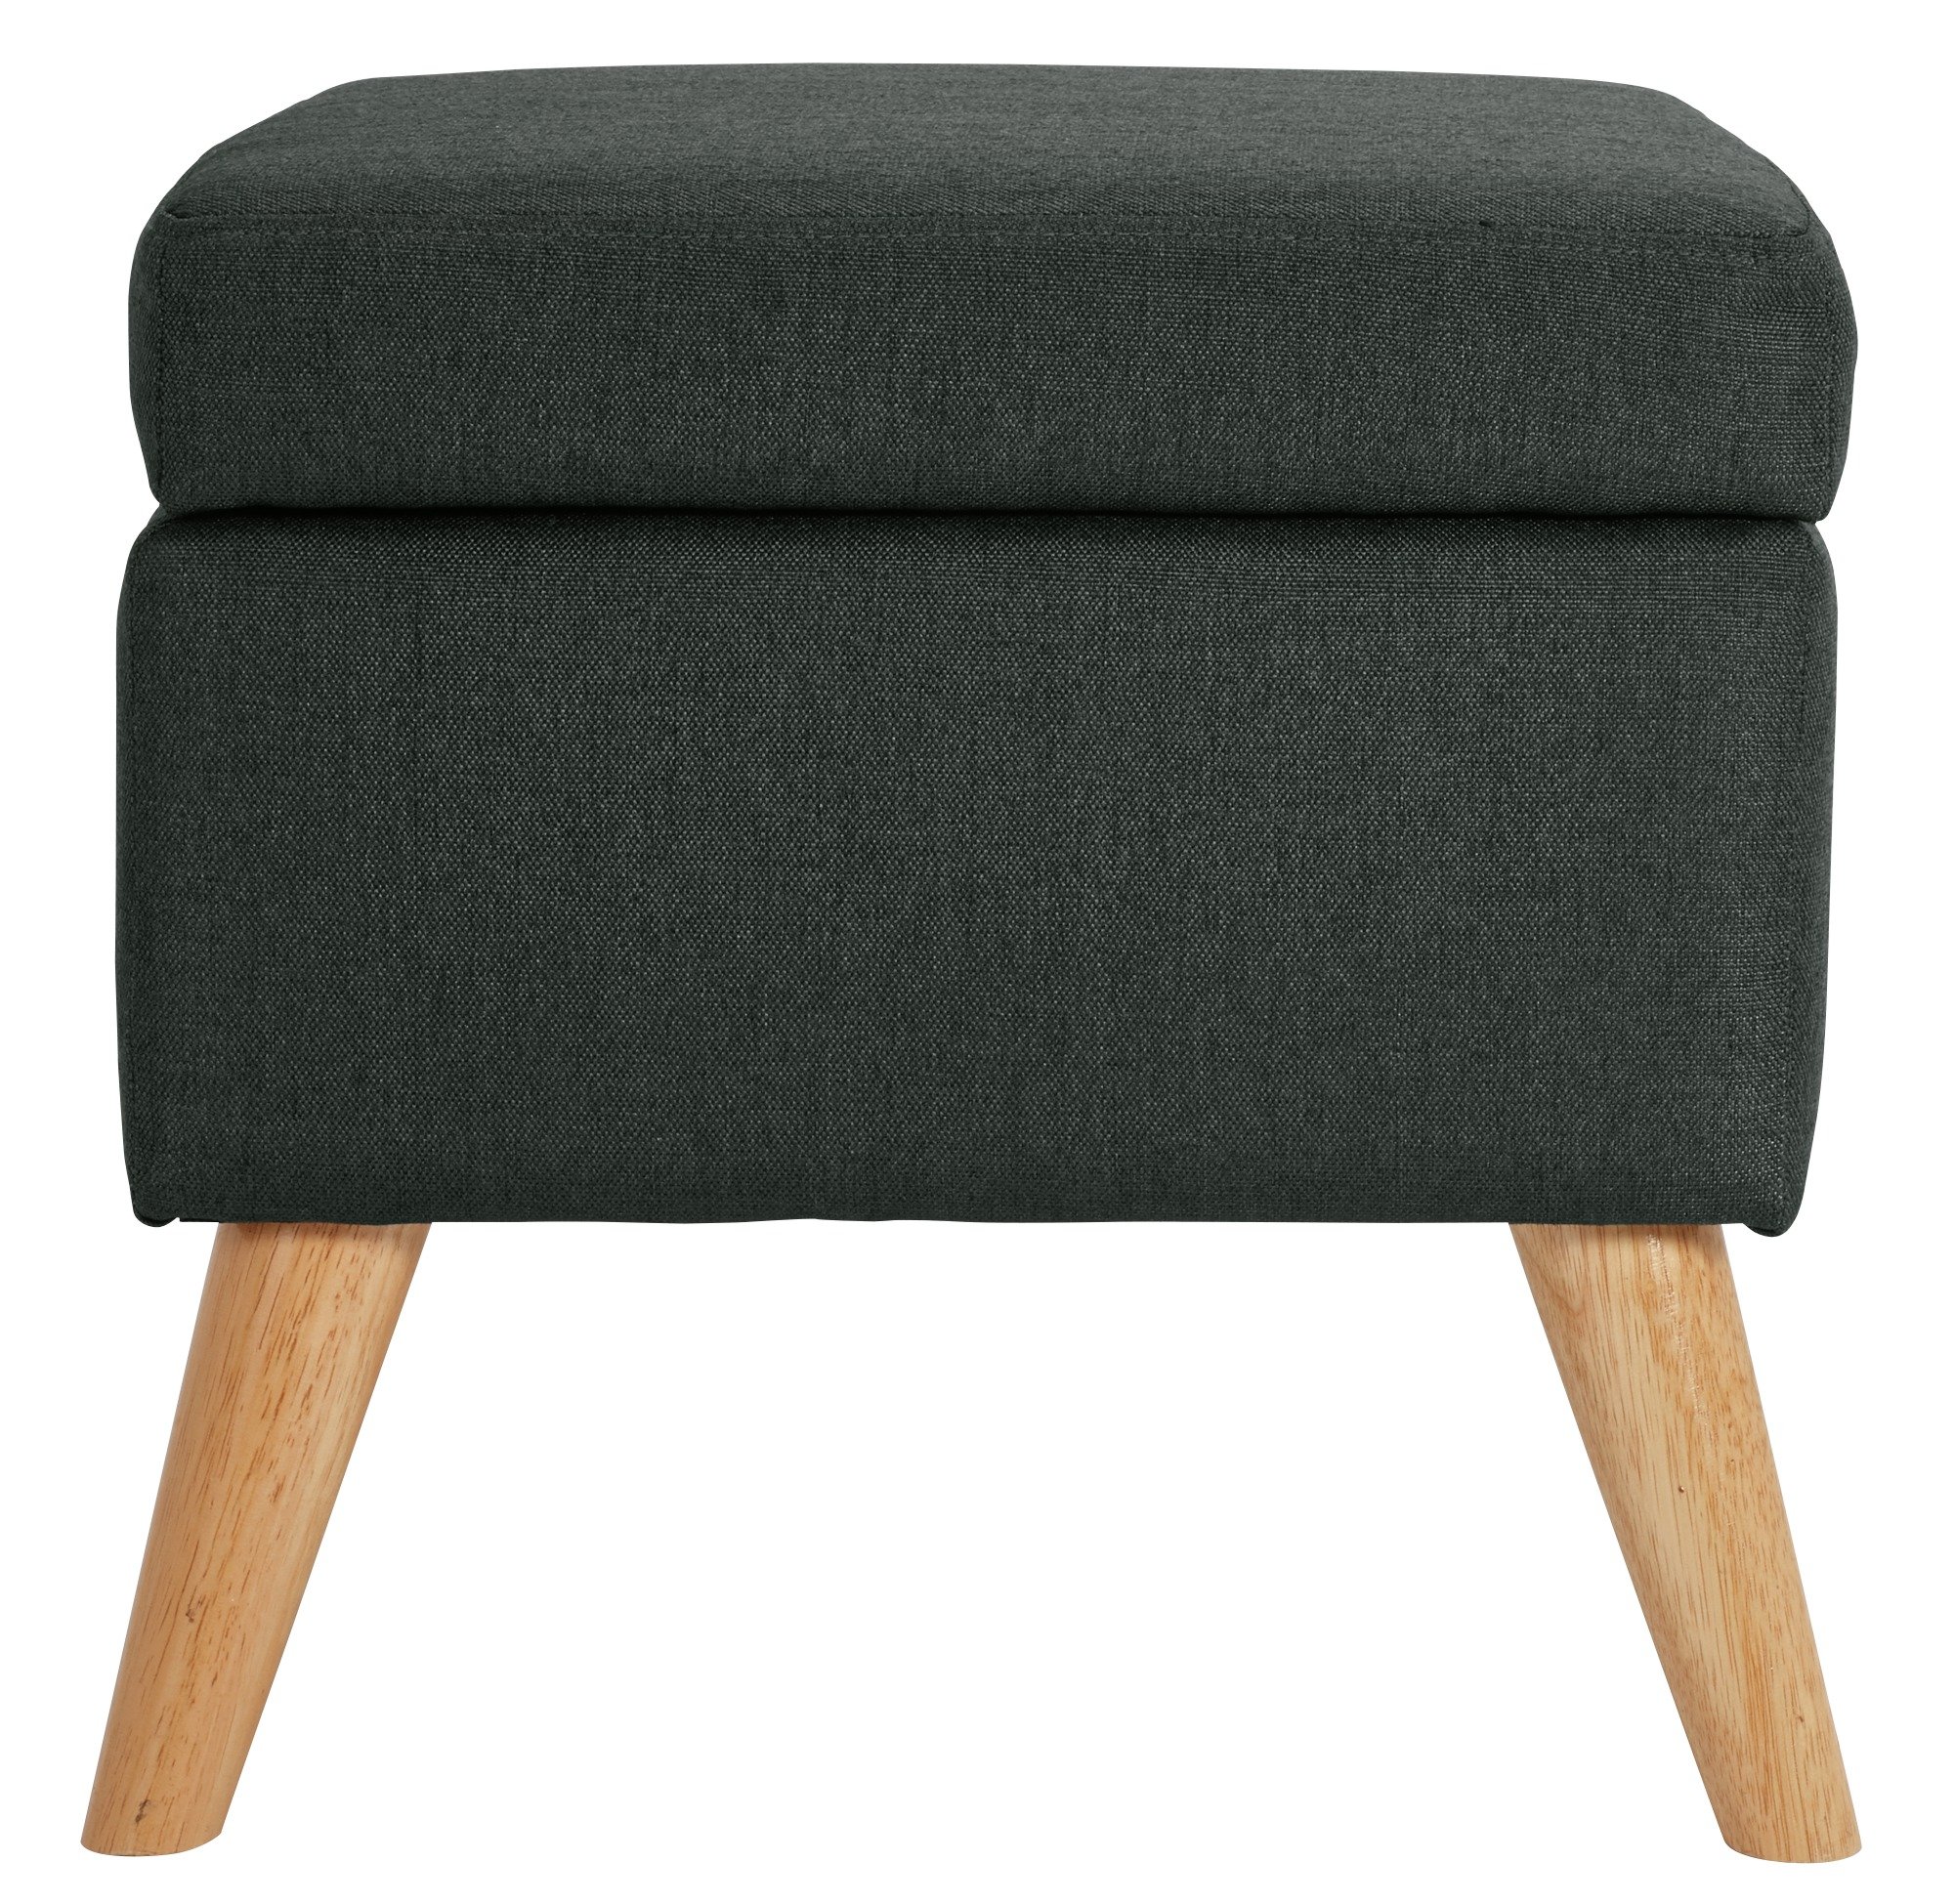 Argos Home Lexie Fabric Storage Footstool - Charcoal